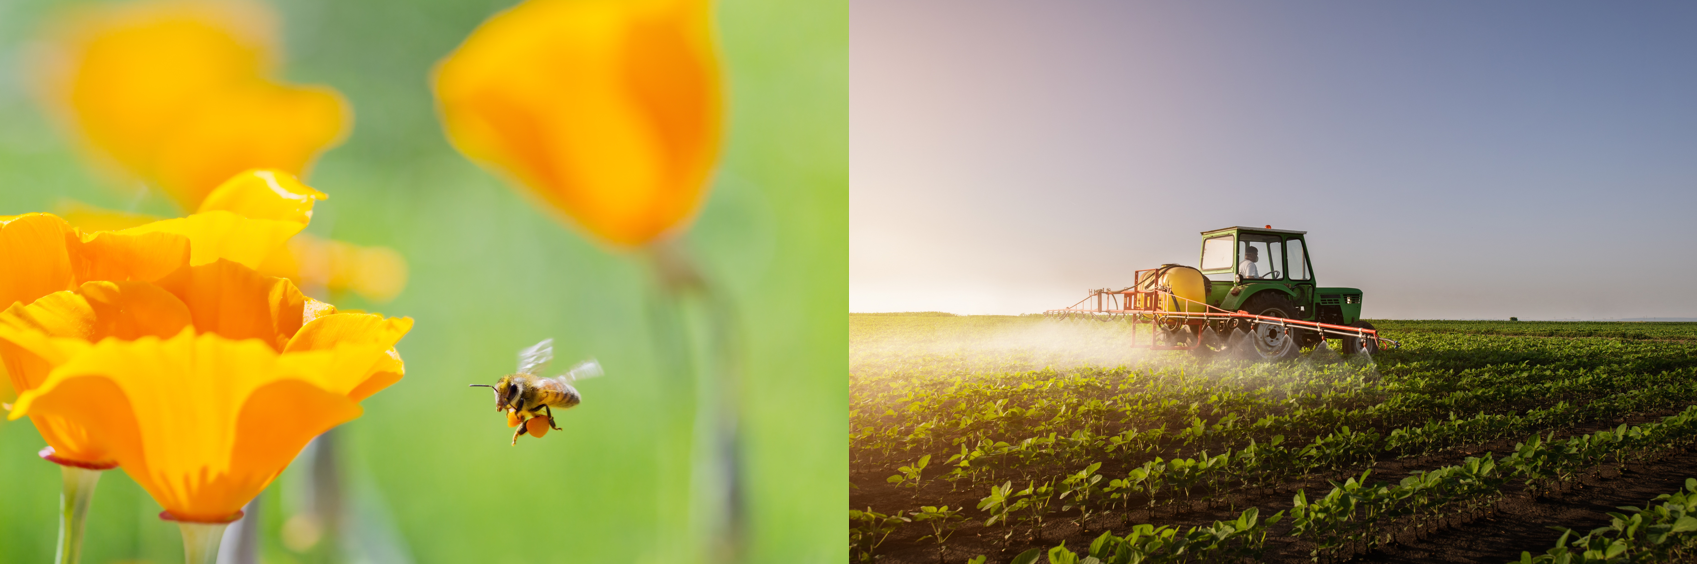 Images of a bee pollinating a flower and a tractor applying fertilizer to a field of crops.